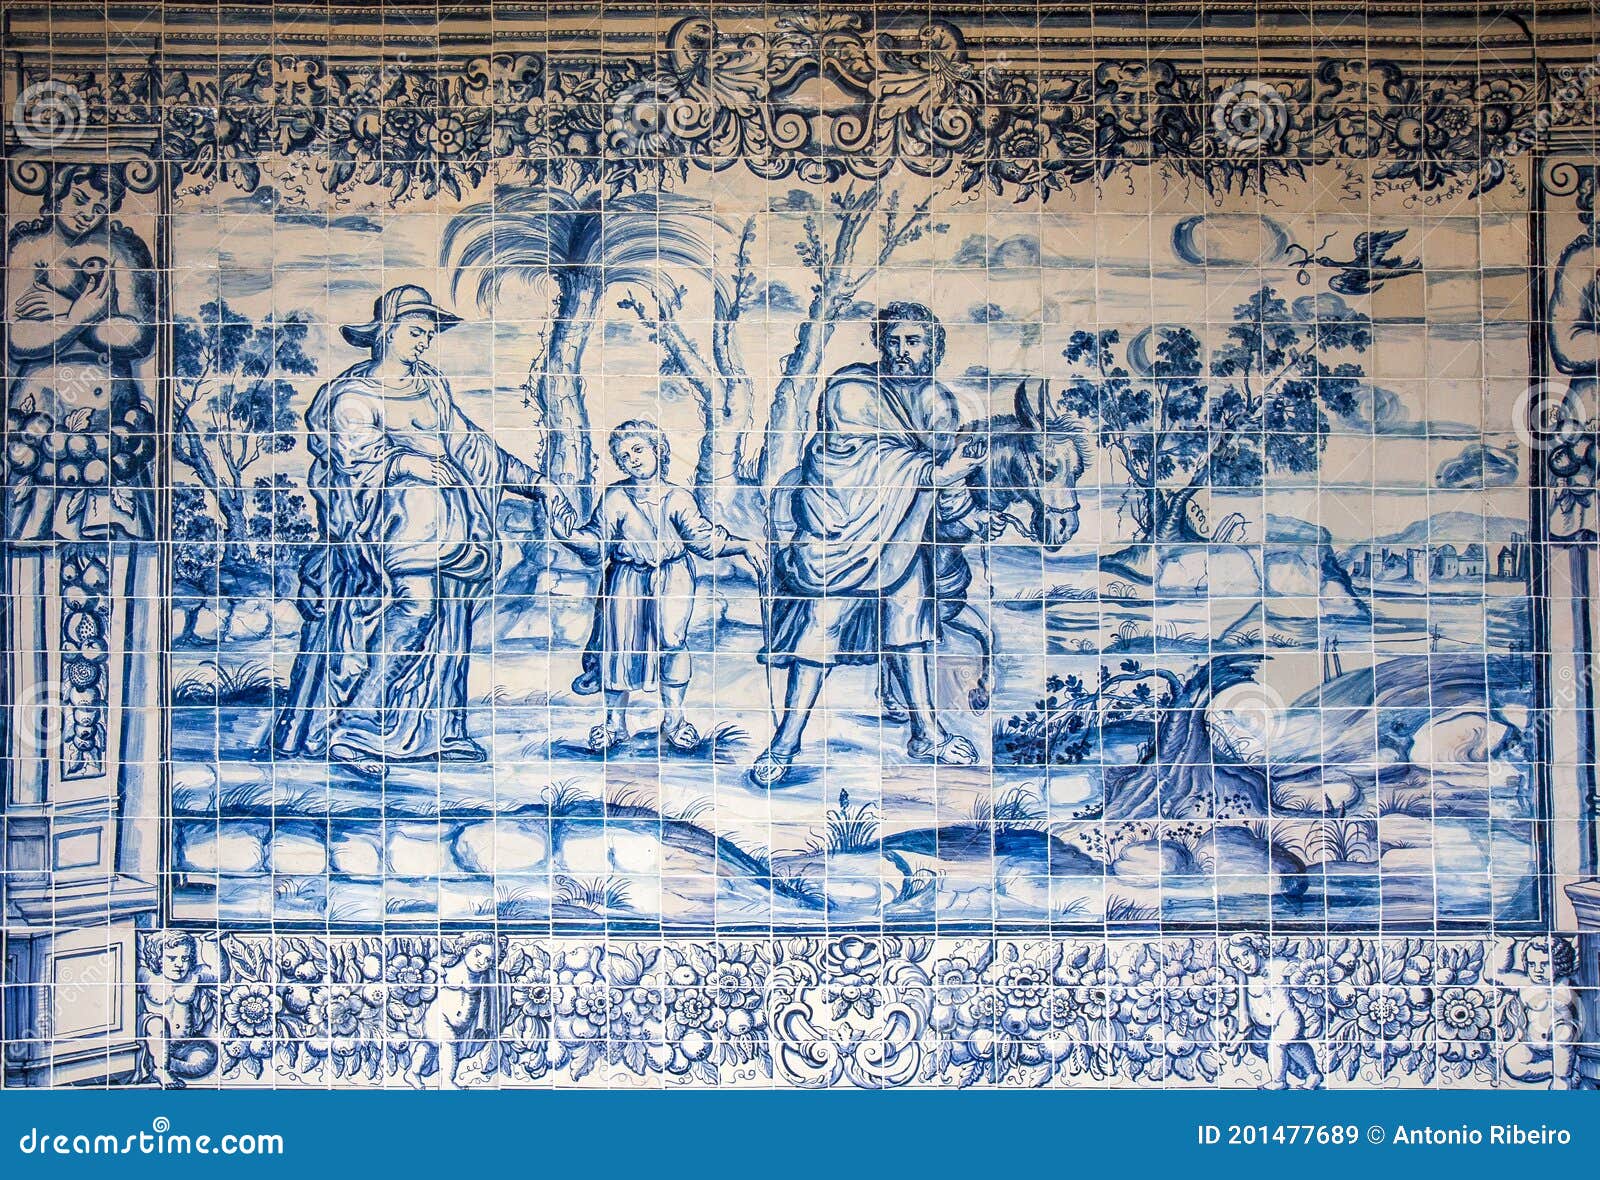 viseu blue tiles panel of the cathedral cloister